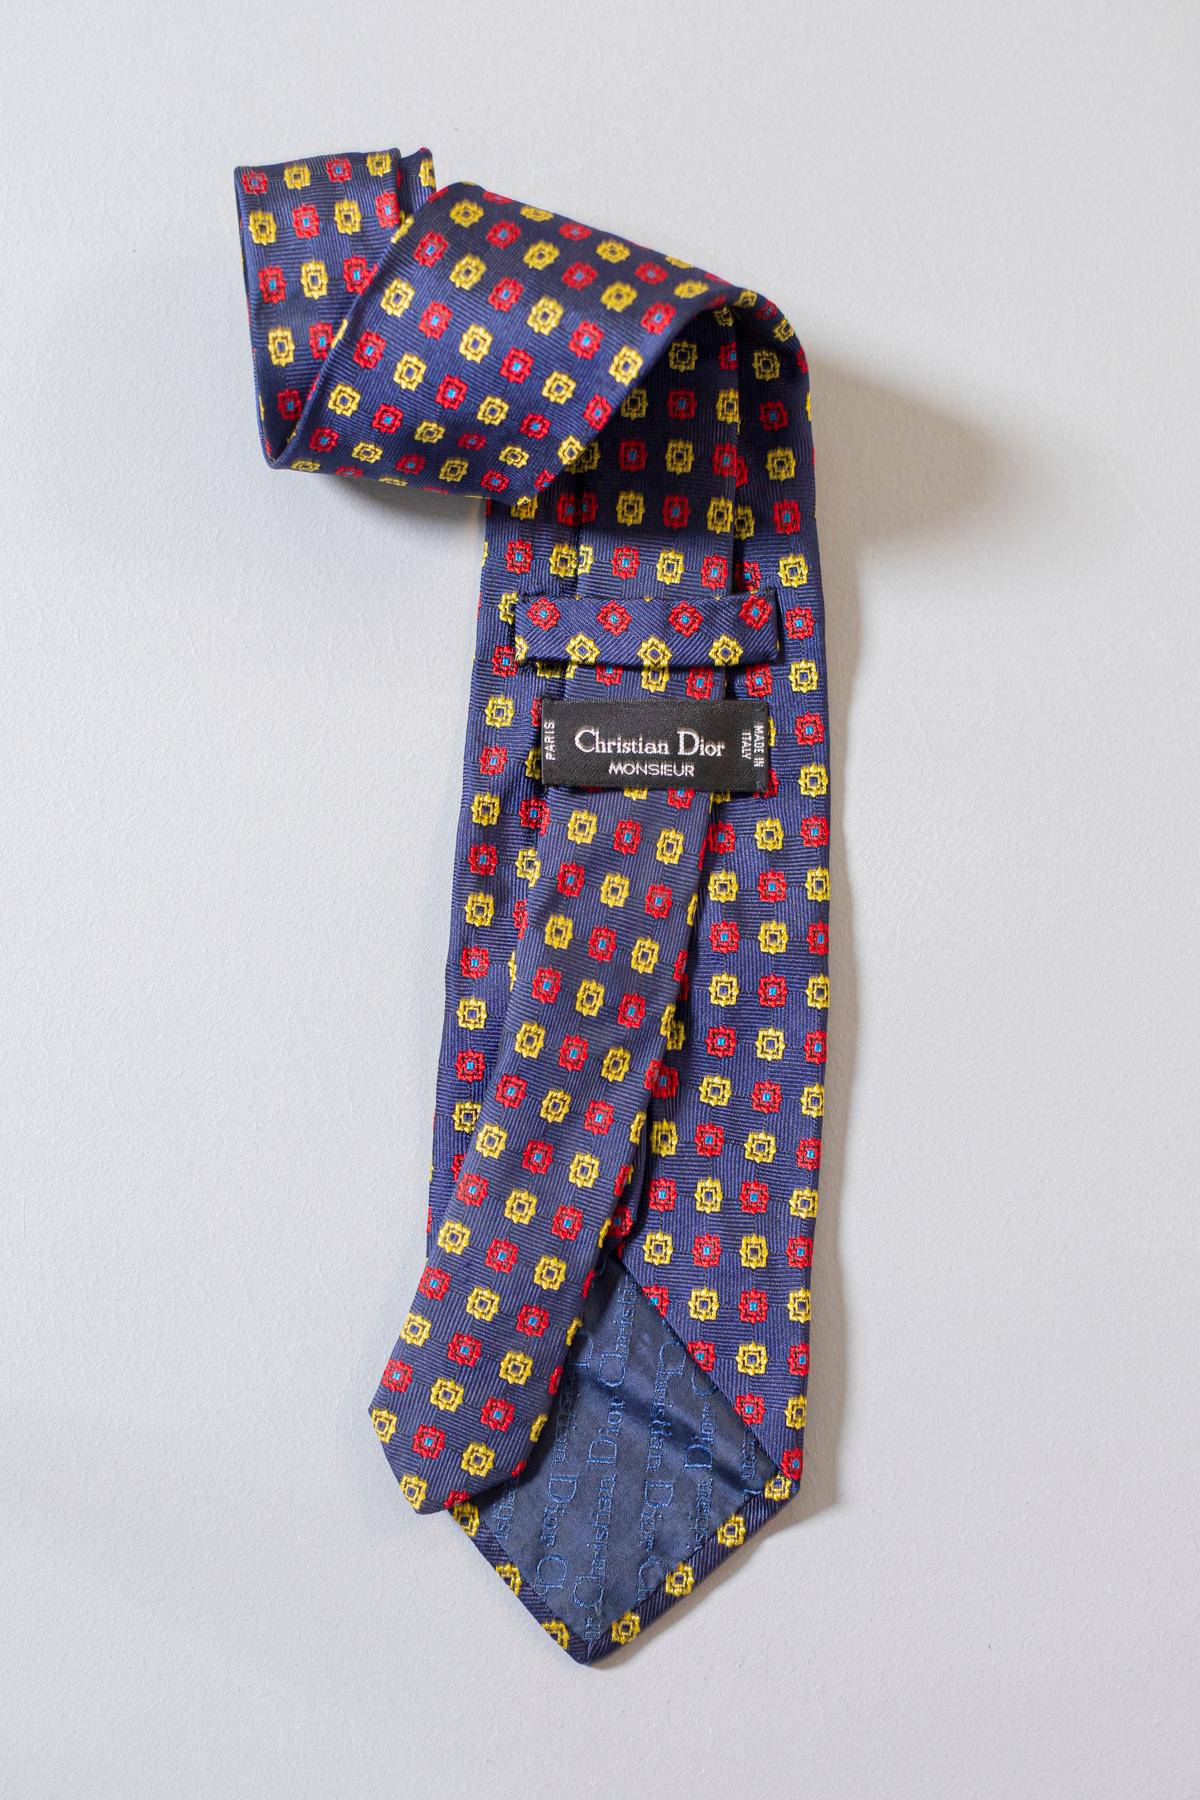 Designed by Christian Dior for his Monsieur Collection, this vintage tie is made in all-silk. It is decorated with red and yellow motifs on a dark blue background. This tie is perfect for a formal night out or for a work event.